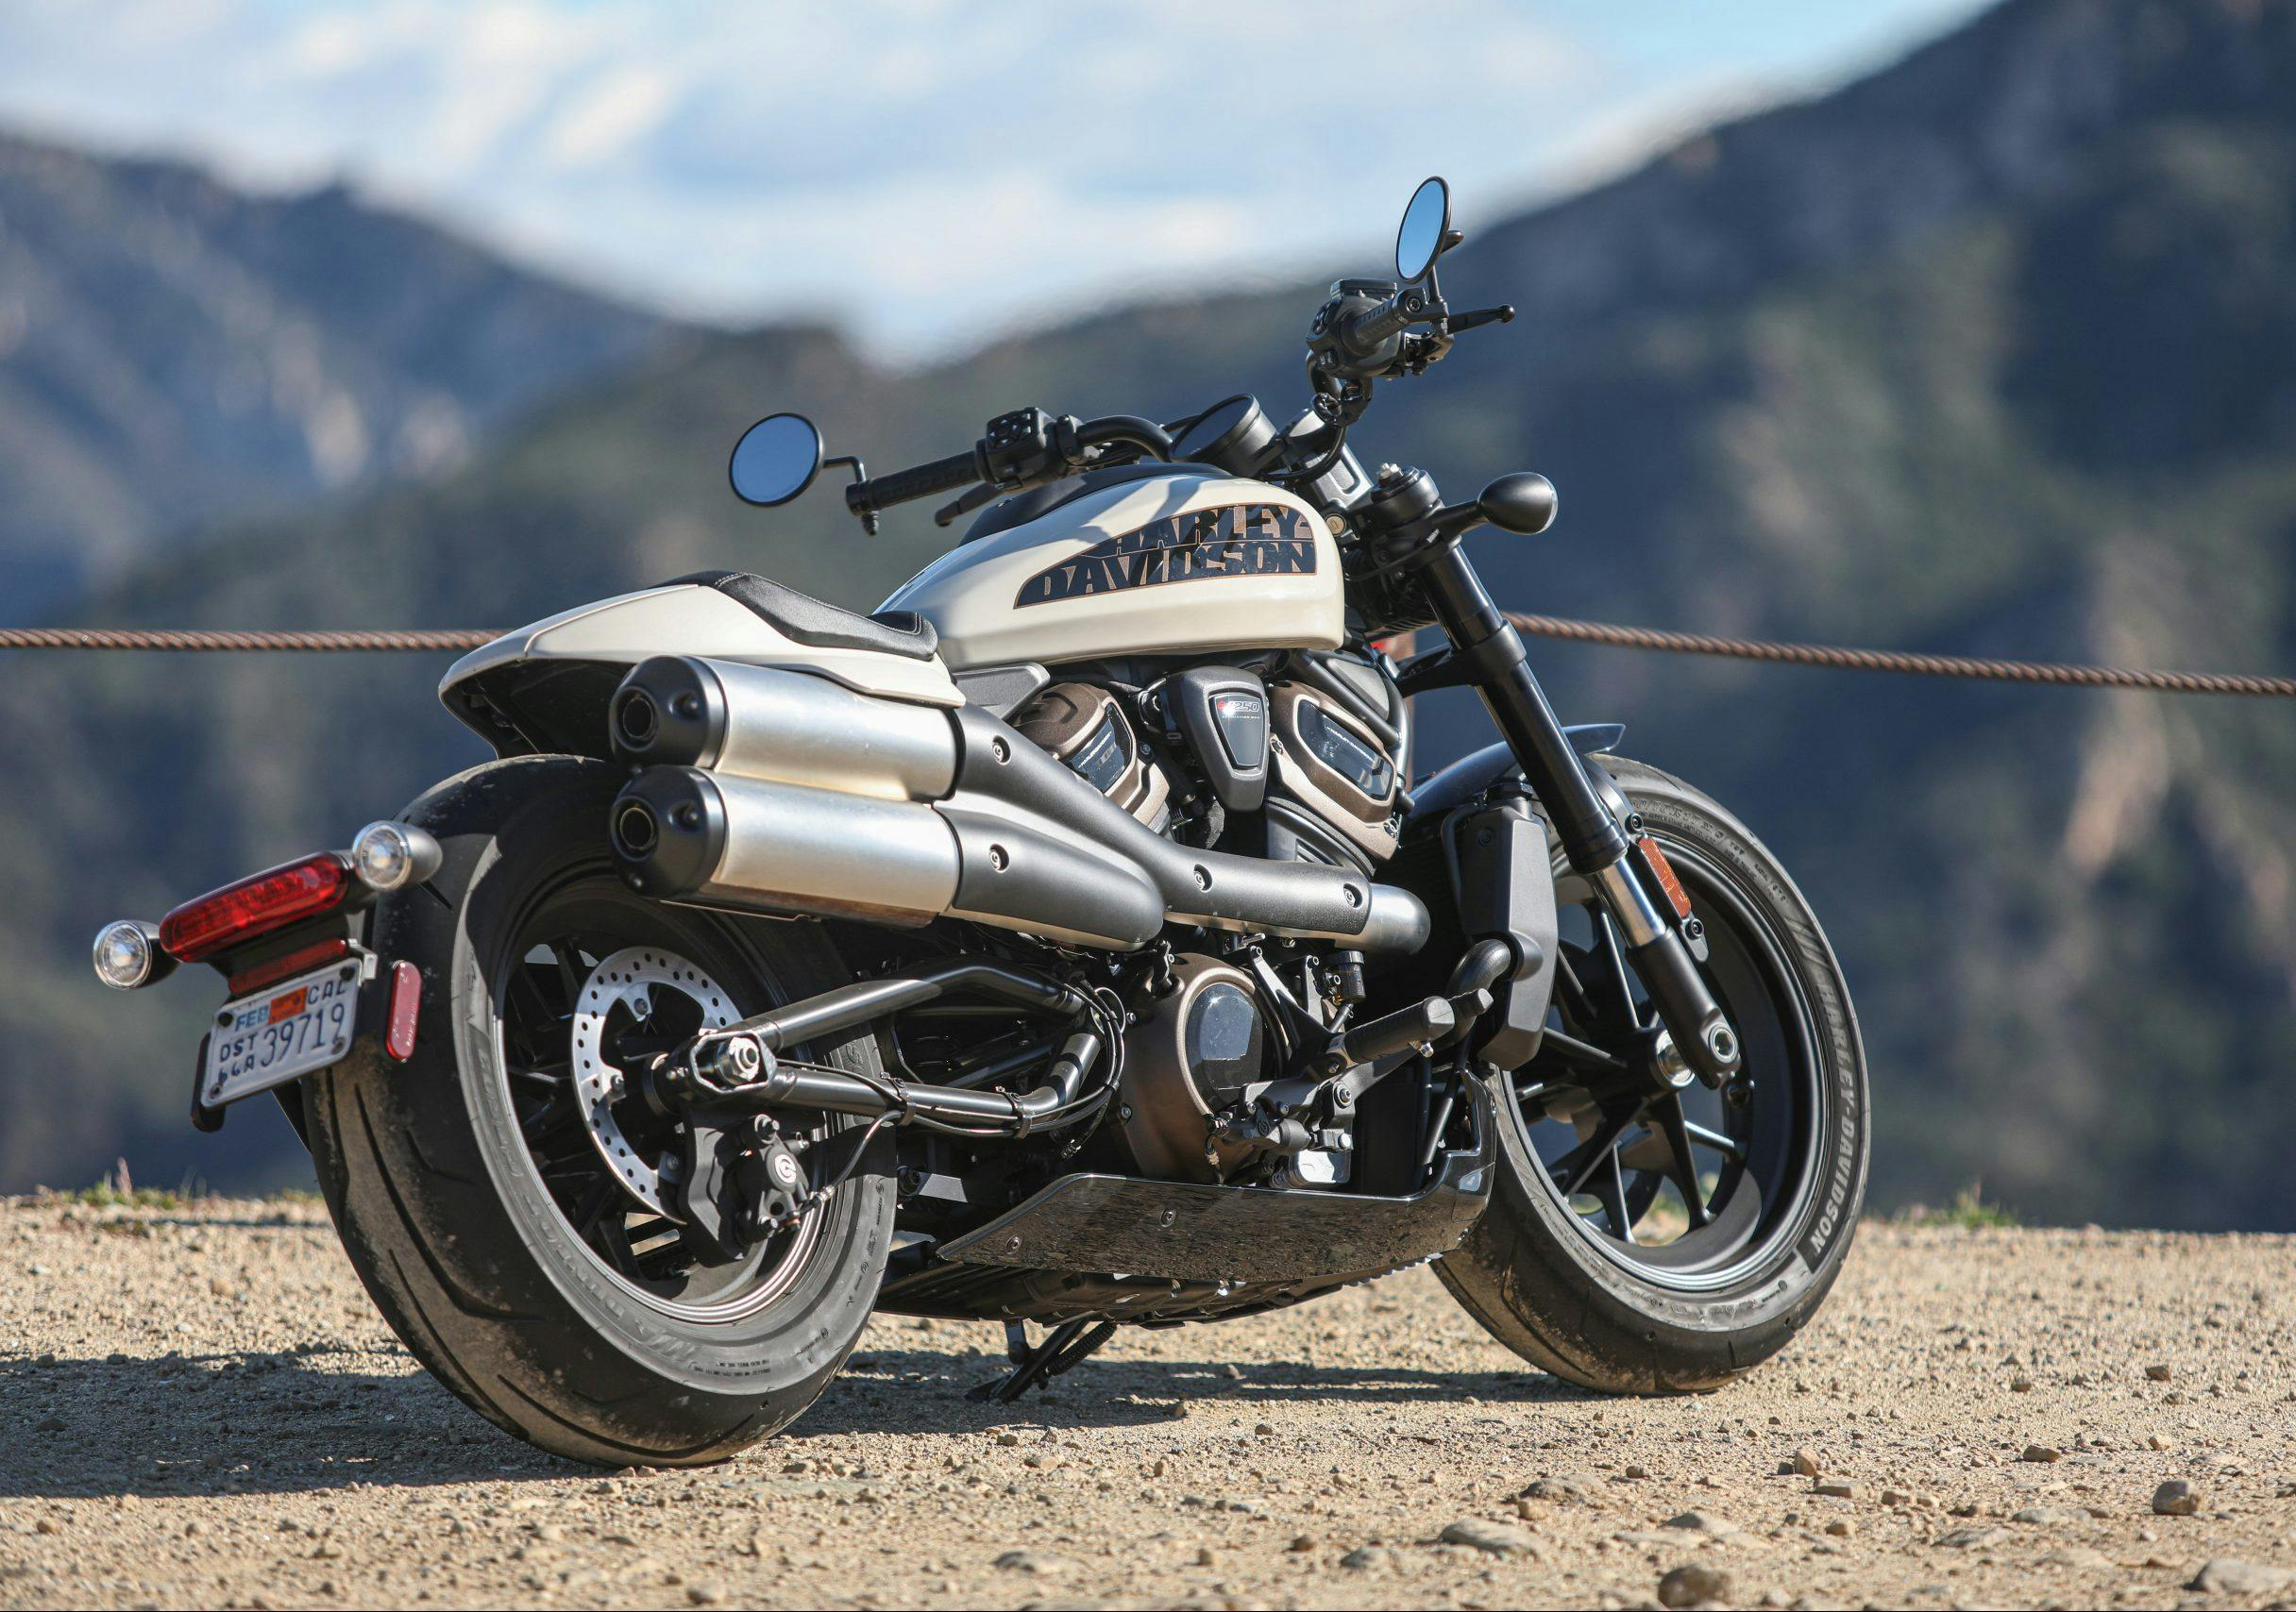 Join us for our first ride on the first electric Harley, the LiveWire -  Video - CNET, live wire 